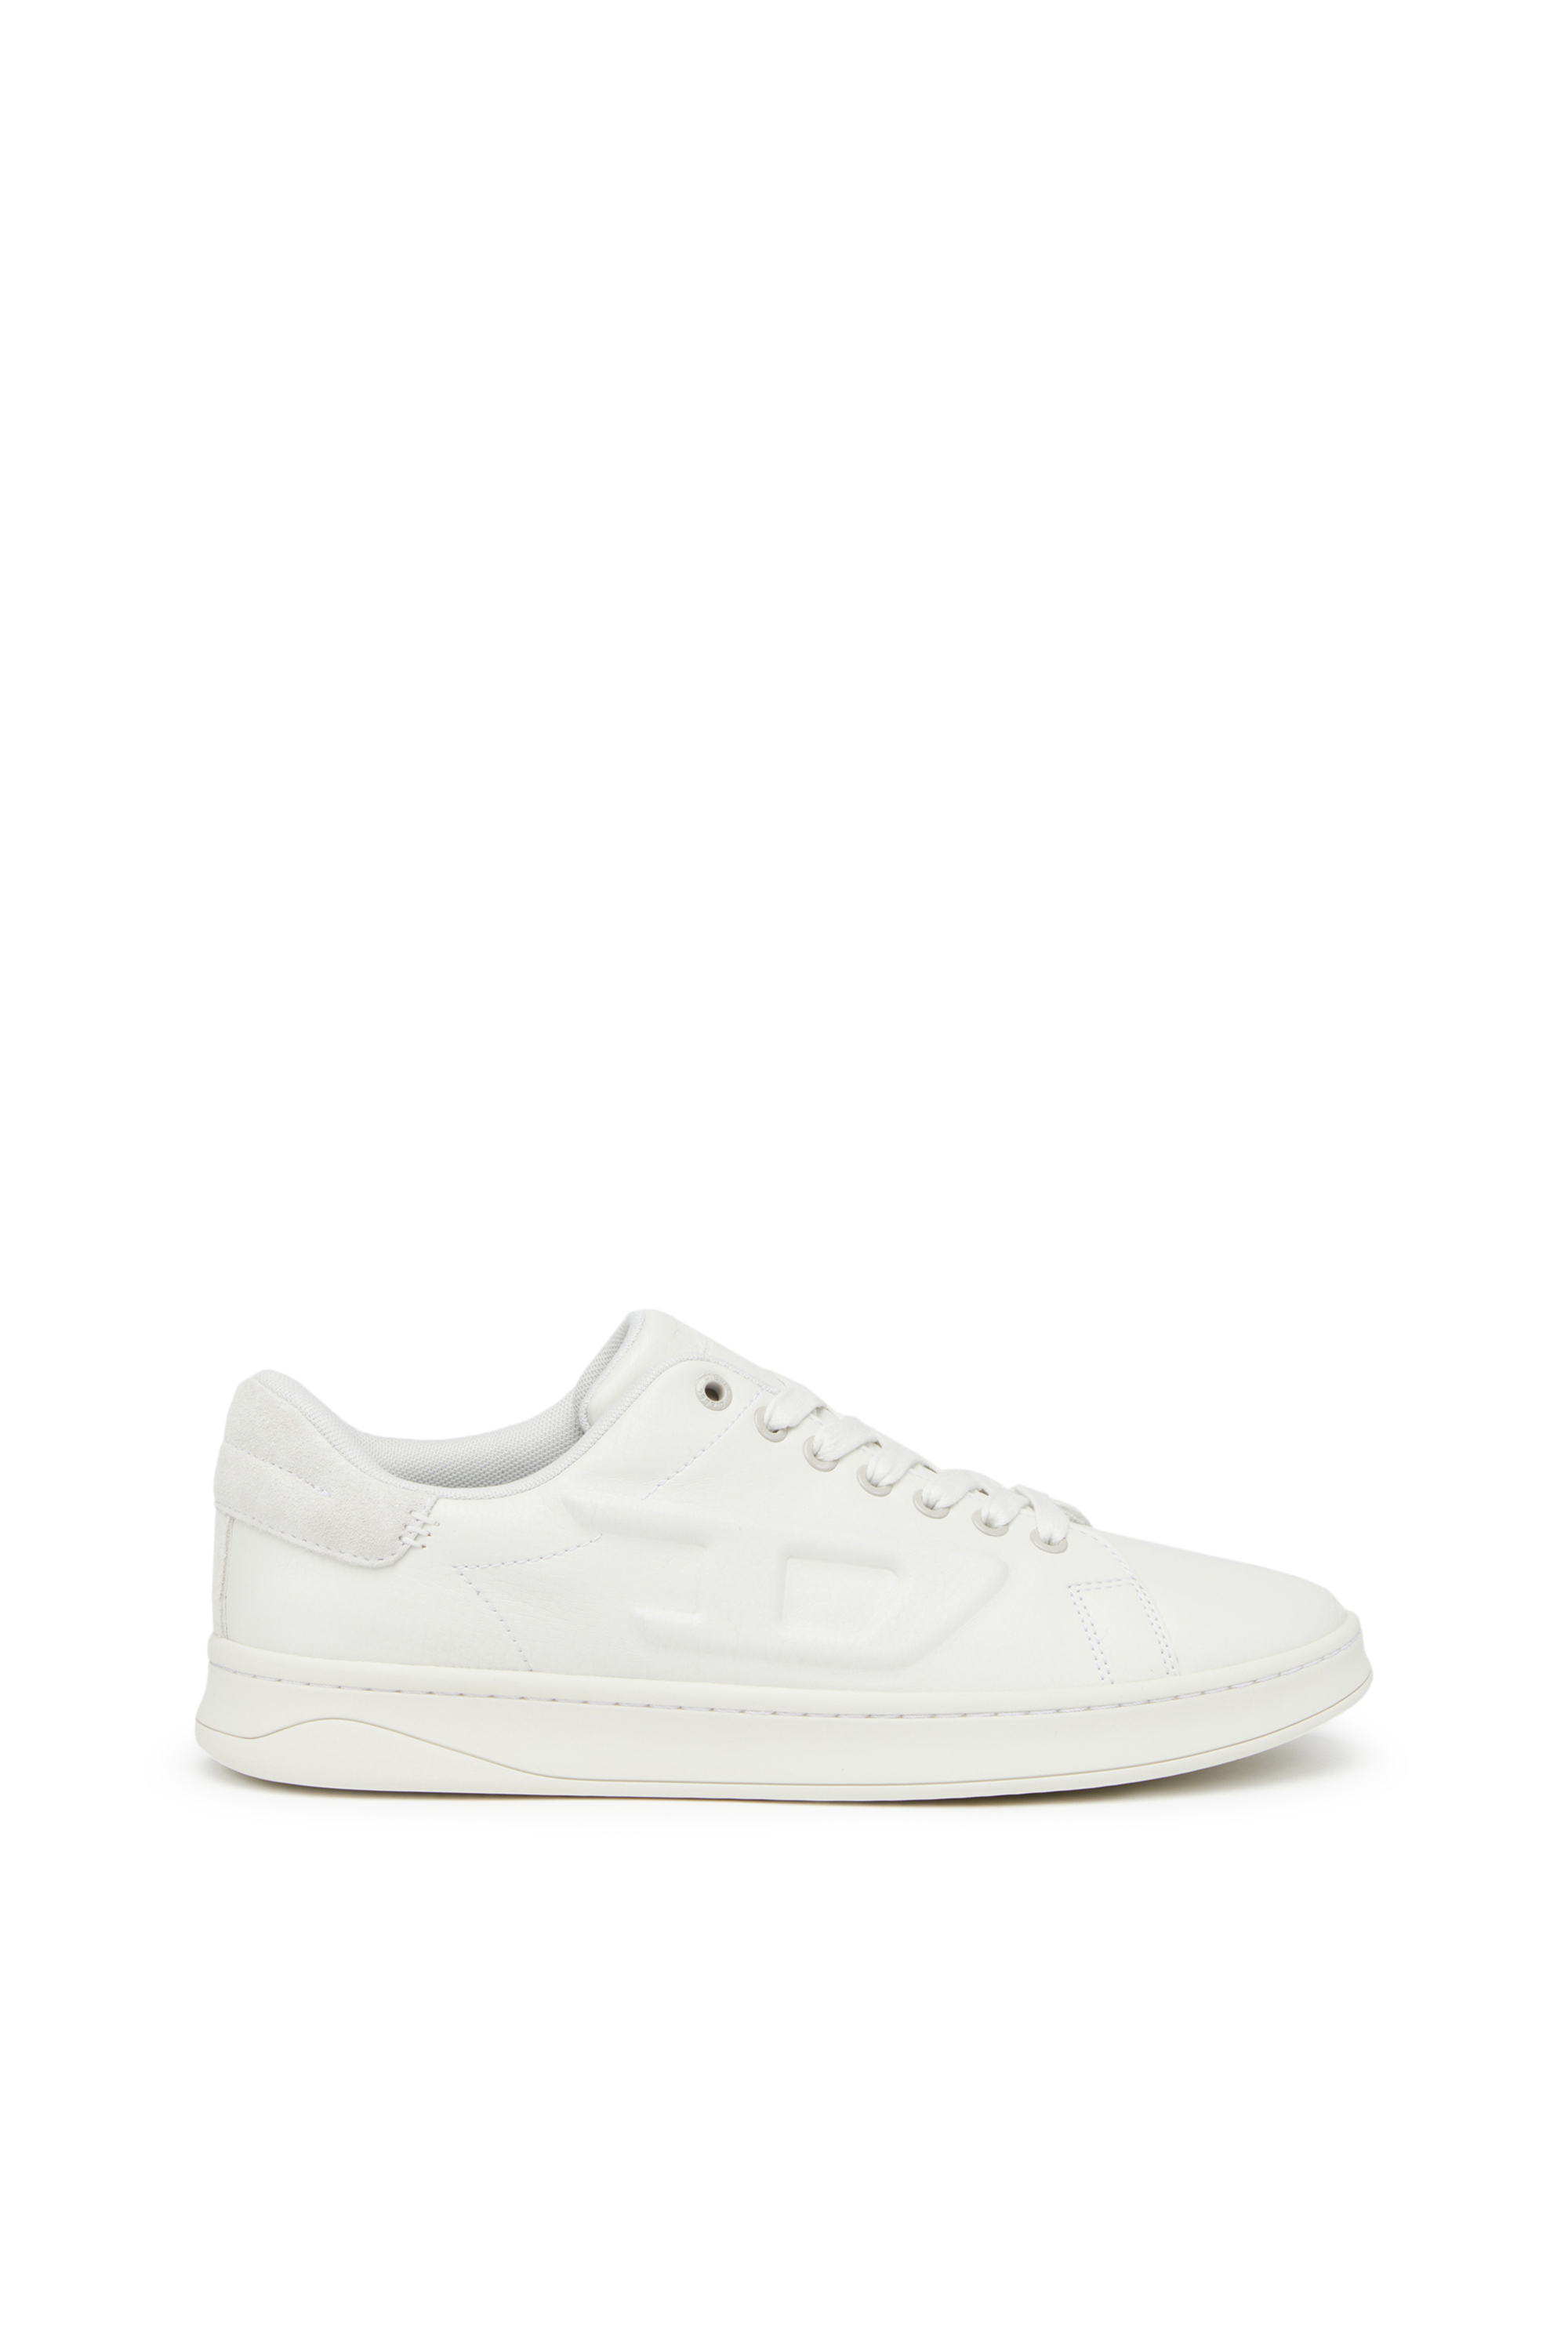 Diesel - S-Athene Low - Sneakers with embossed D logo - Sneakers - Man - White